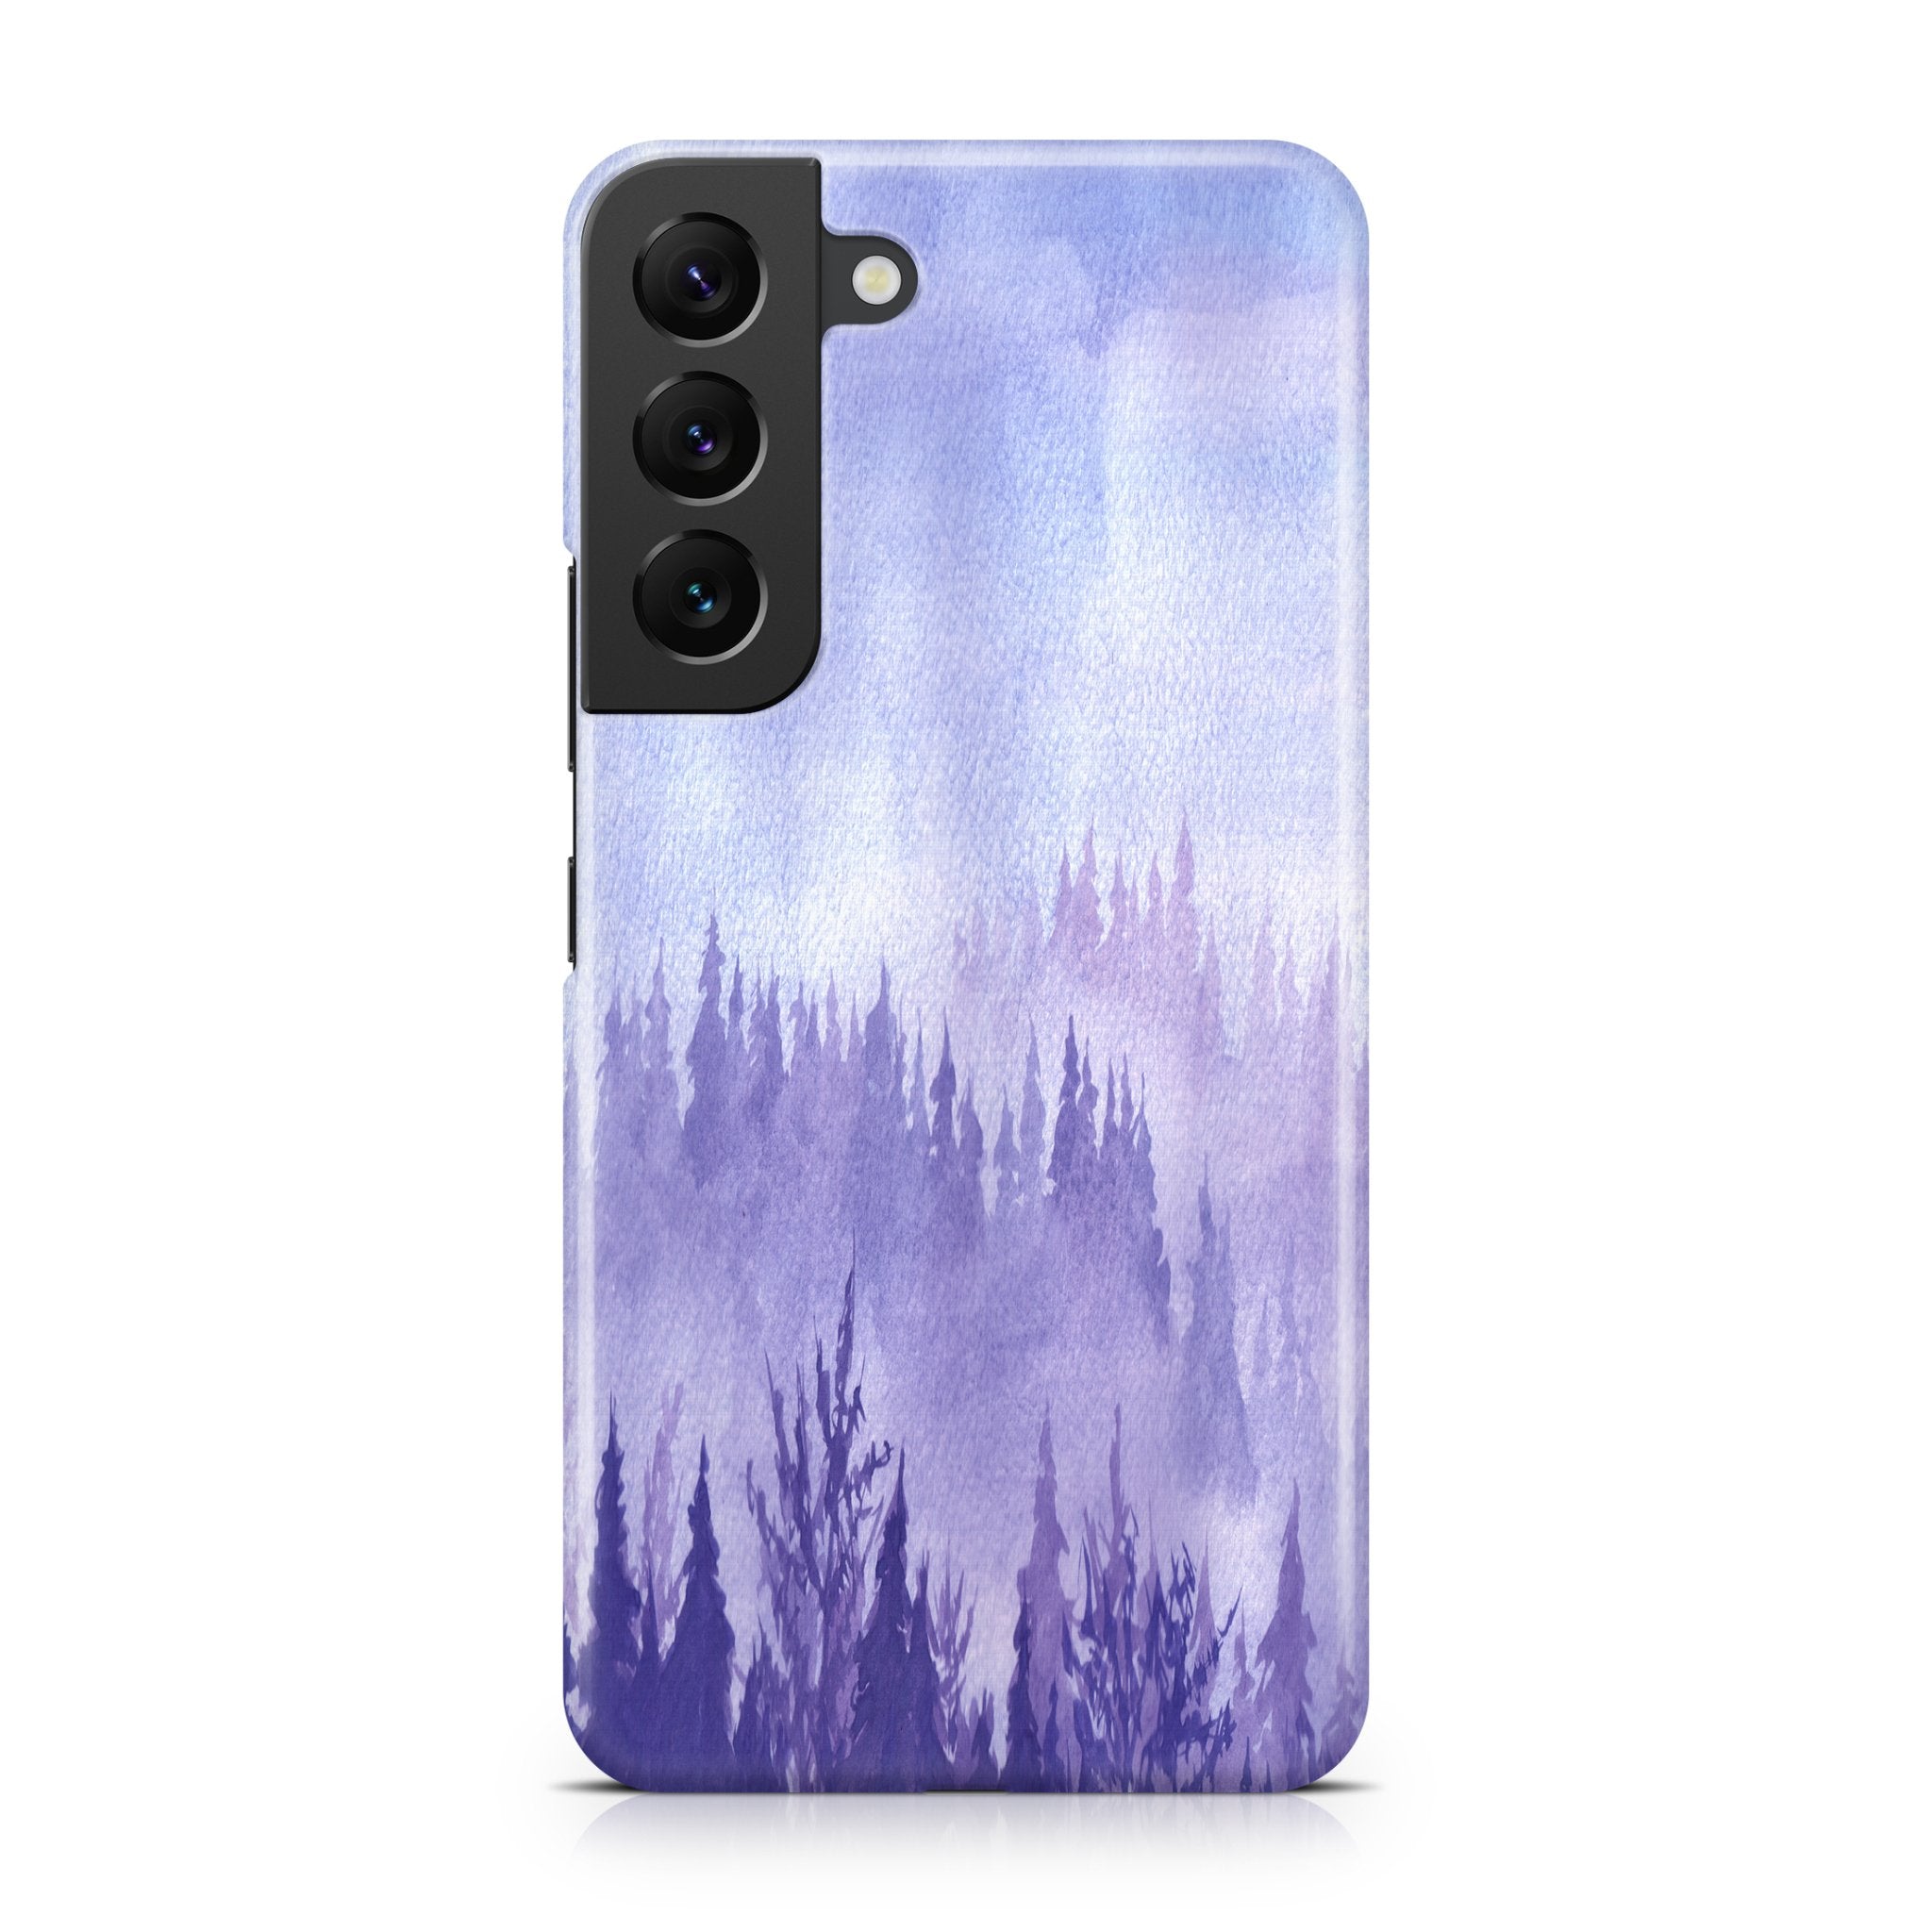 Purple Hills - Samsung phone case designs by CaseSwagger